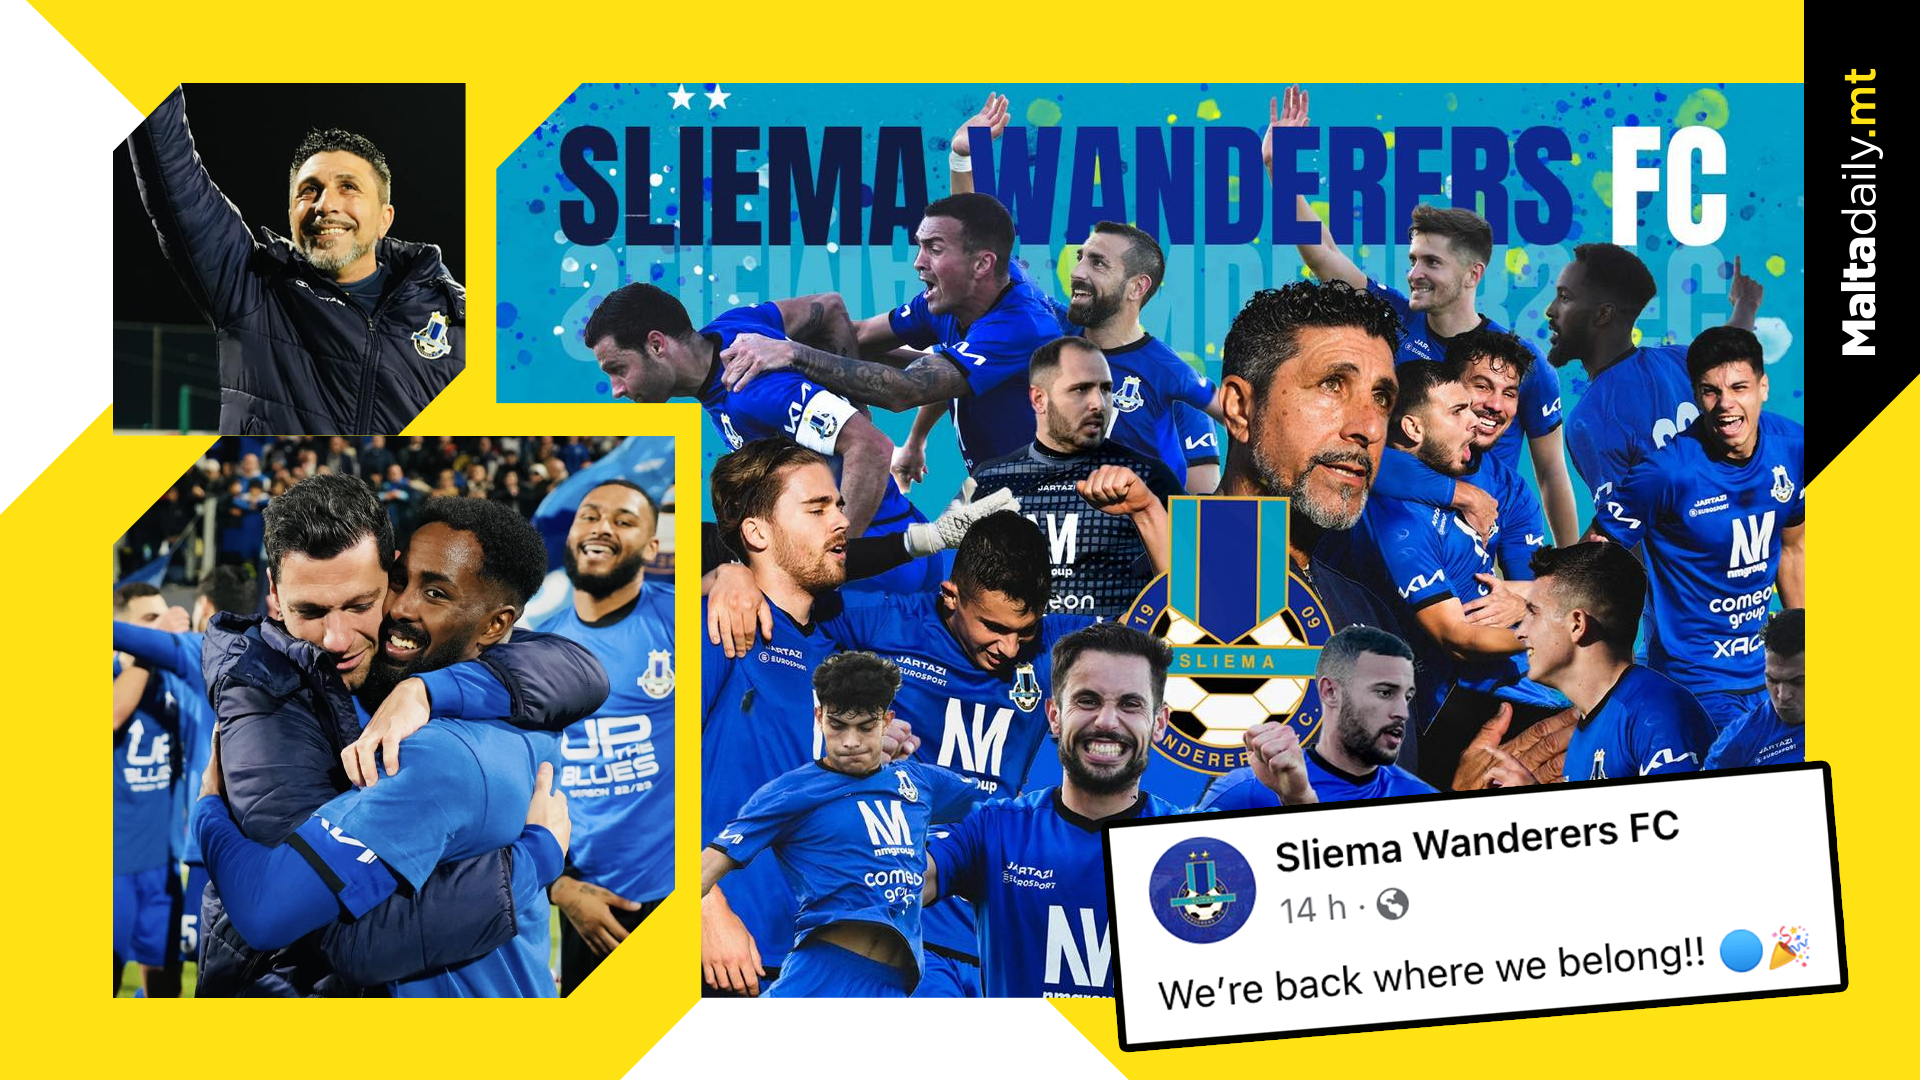 Sliema Wanderers promoted back to Premier League